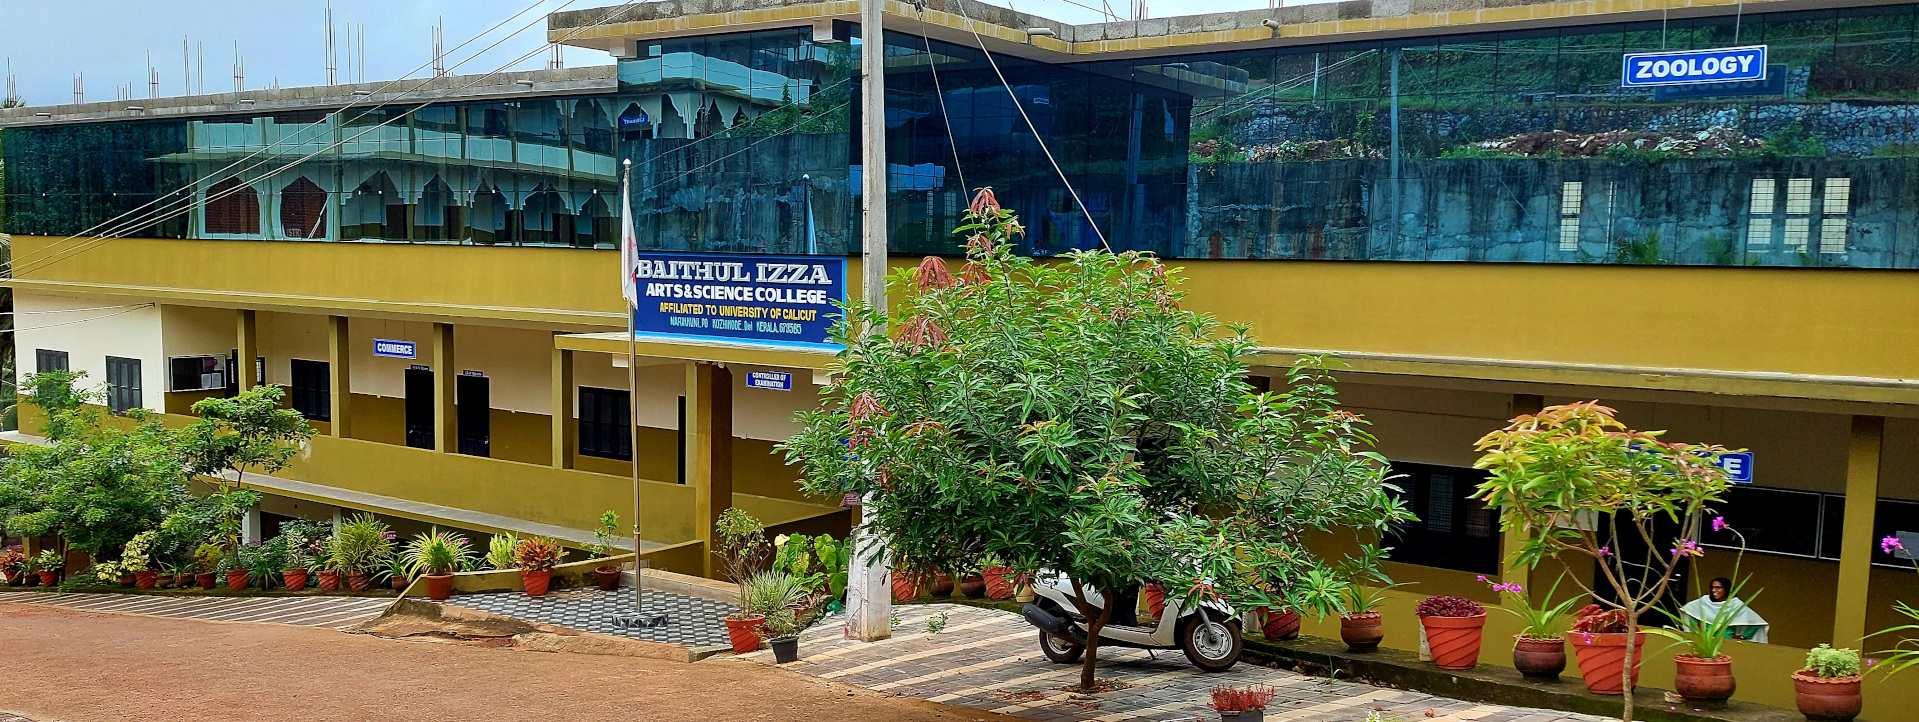 BaithulIzza Arts and Science College, Kozhikode